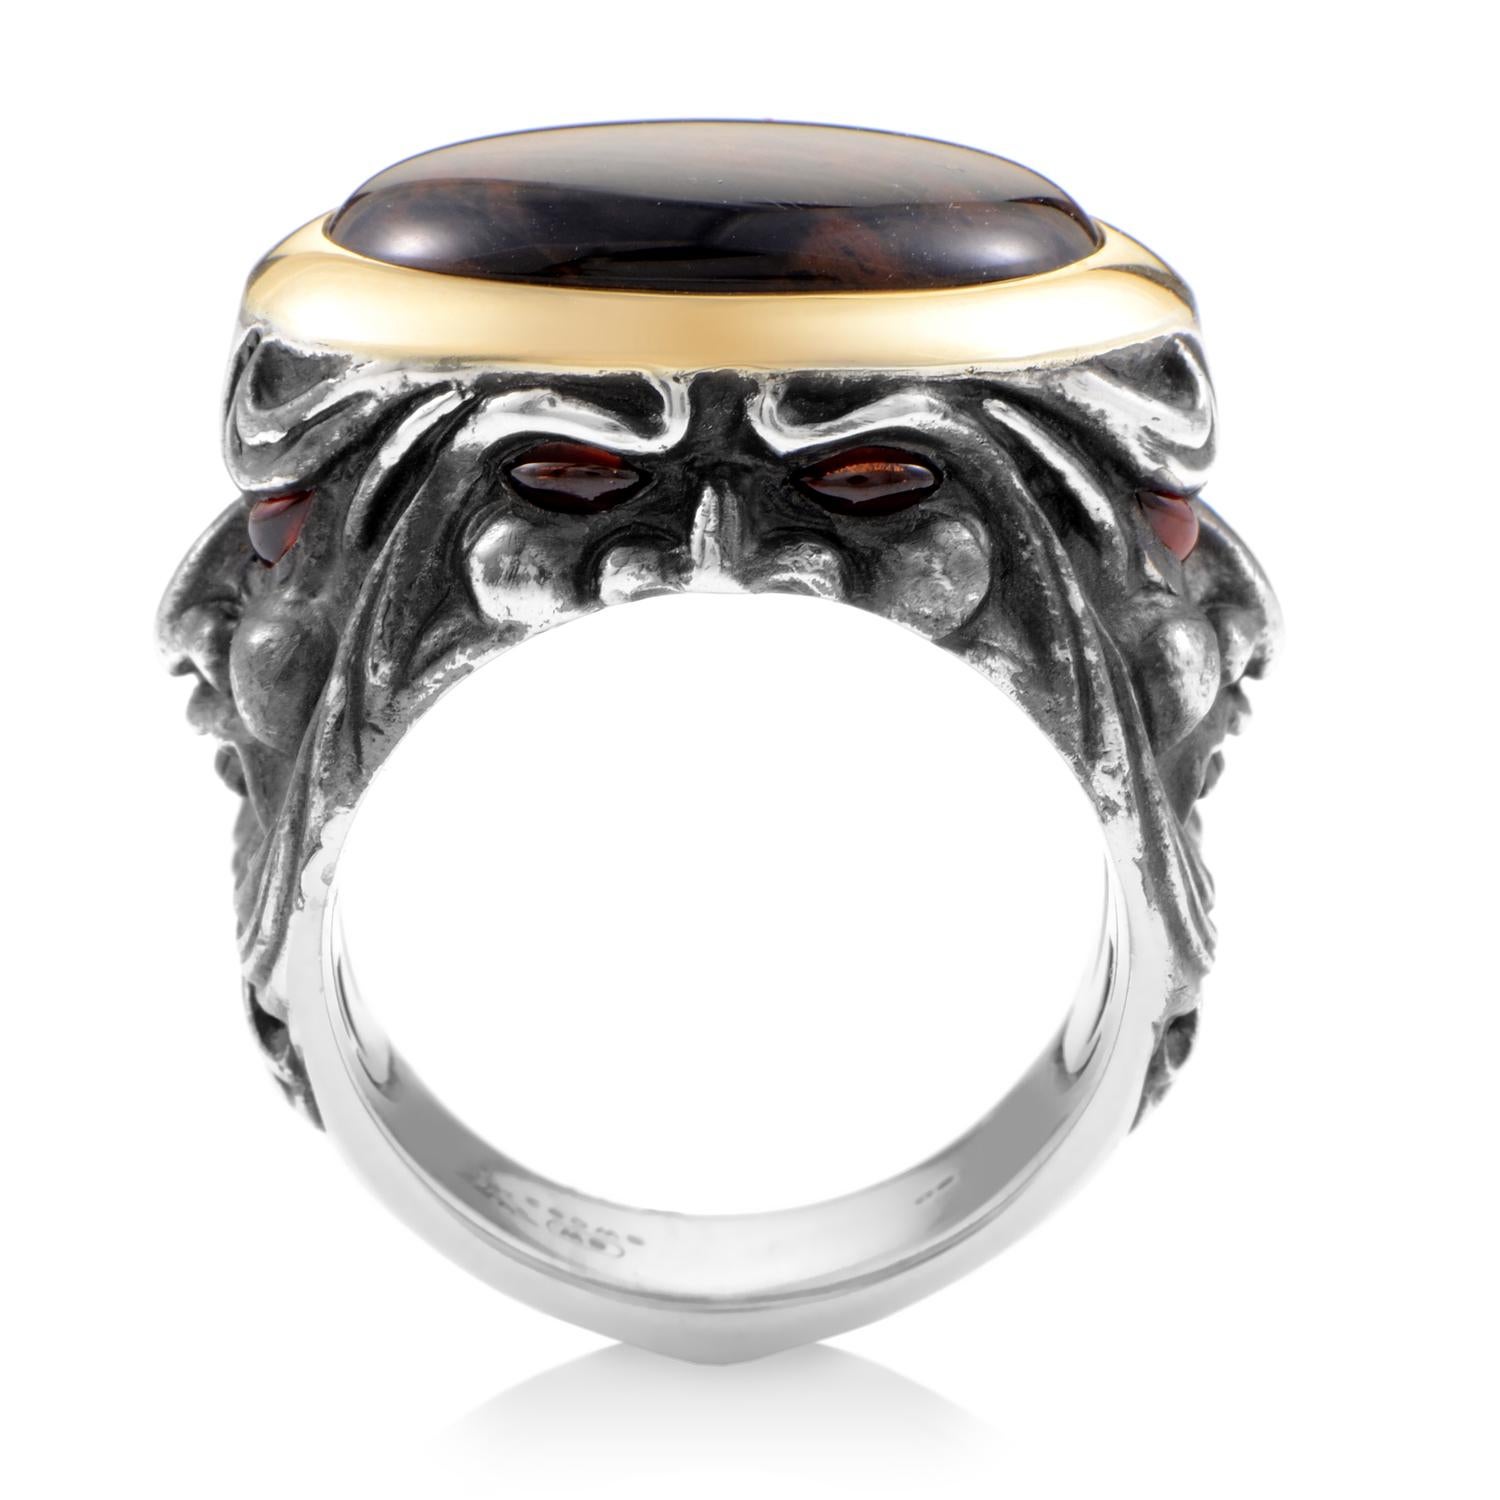 Daring in its astounding depiction of faces with piercing garnet eyes, this amazing silver ring from Stephen Webster boasts an appearance that honors the brand's spirit, with the mesmerizing spiderman jasper central stone surrounded by brilliantly